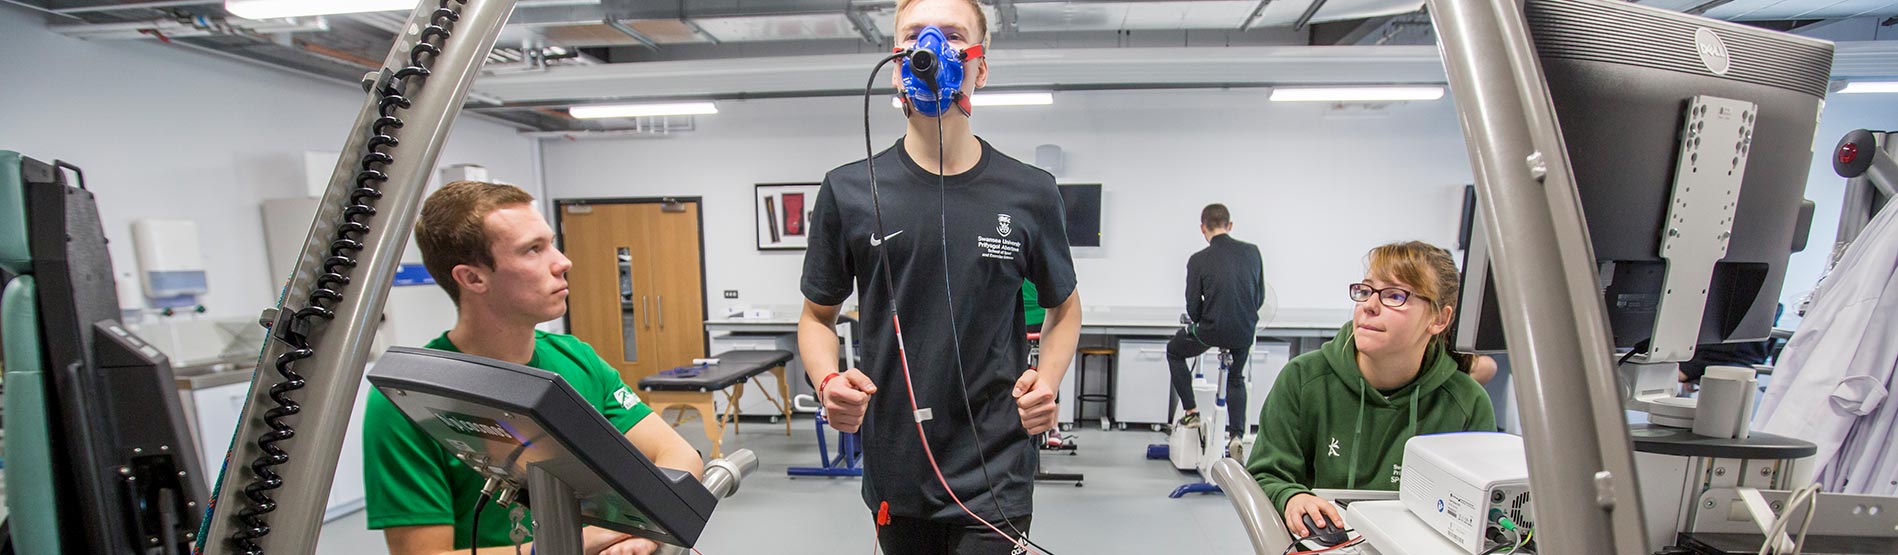 Sports Science Research, Sport Performance Institute